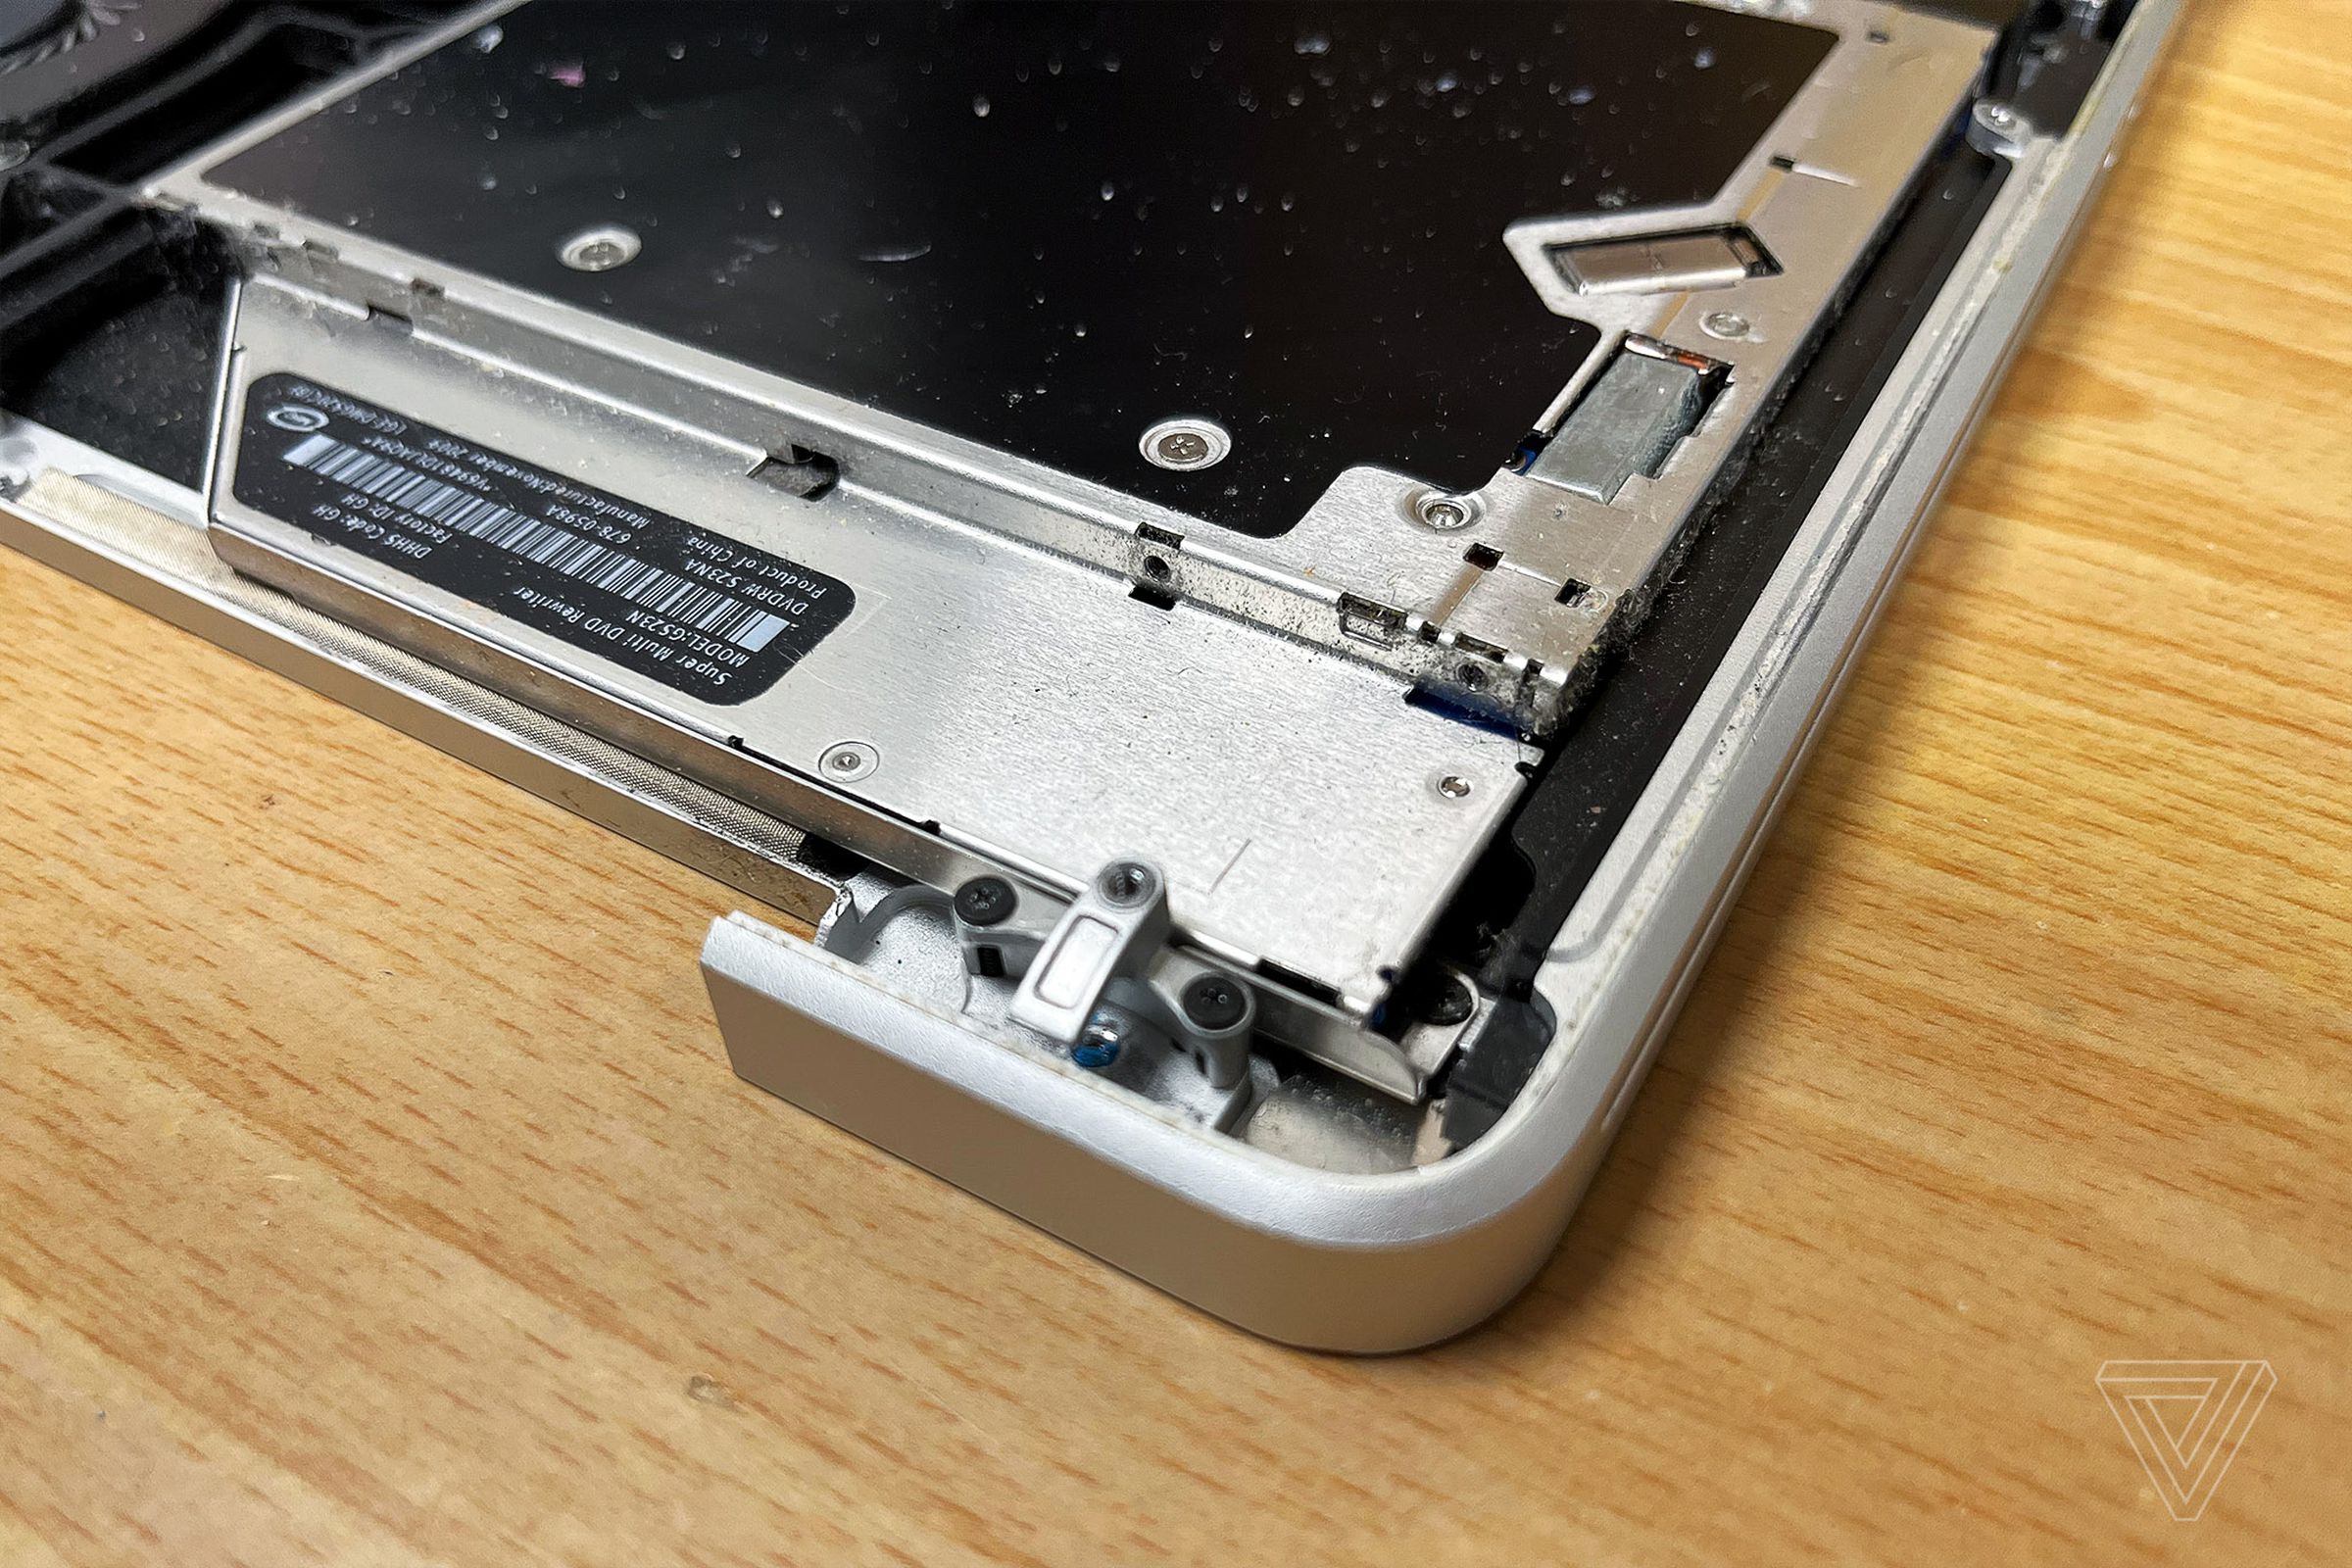 2009 MacBook Pro: Small pieces were returned so the bottom case can be reinstalled.